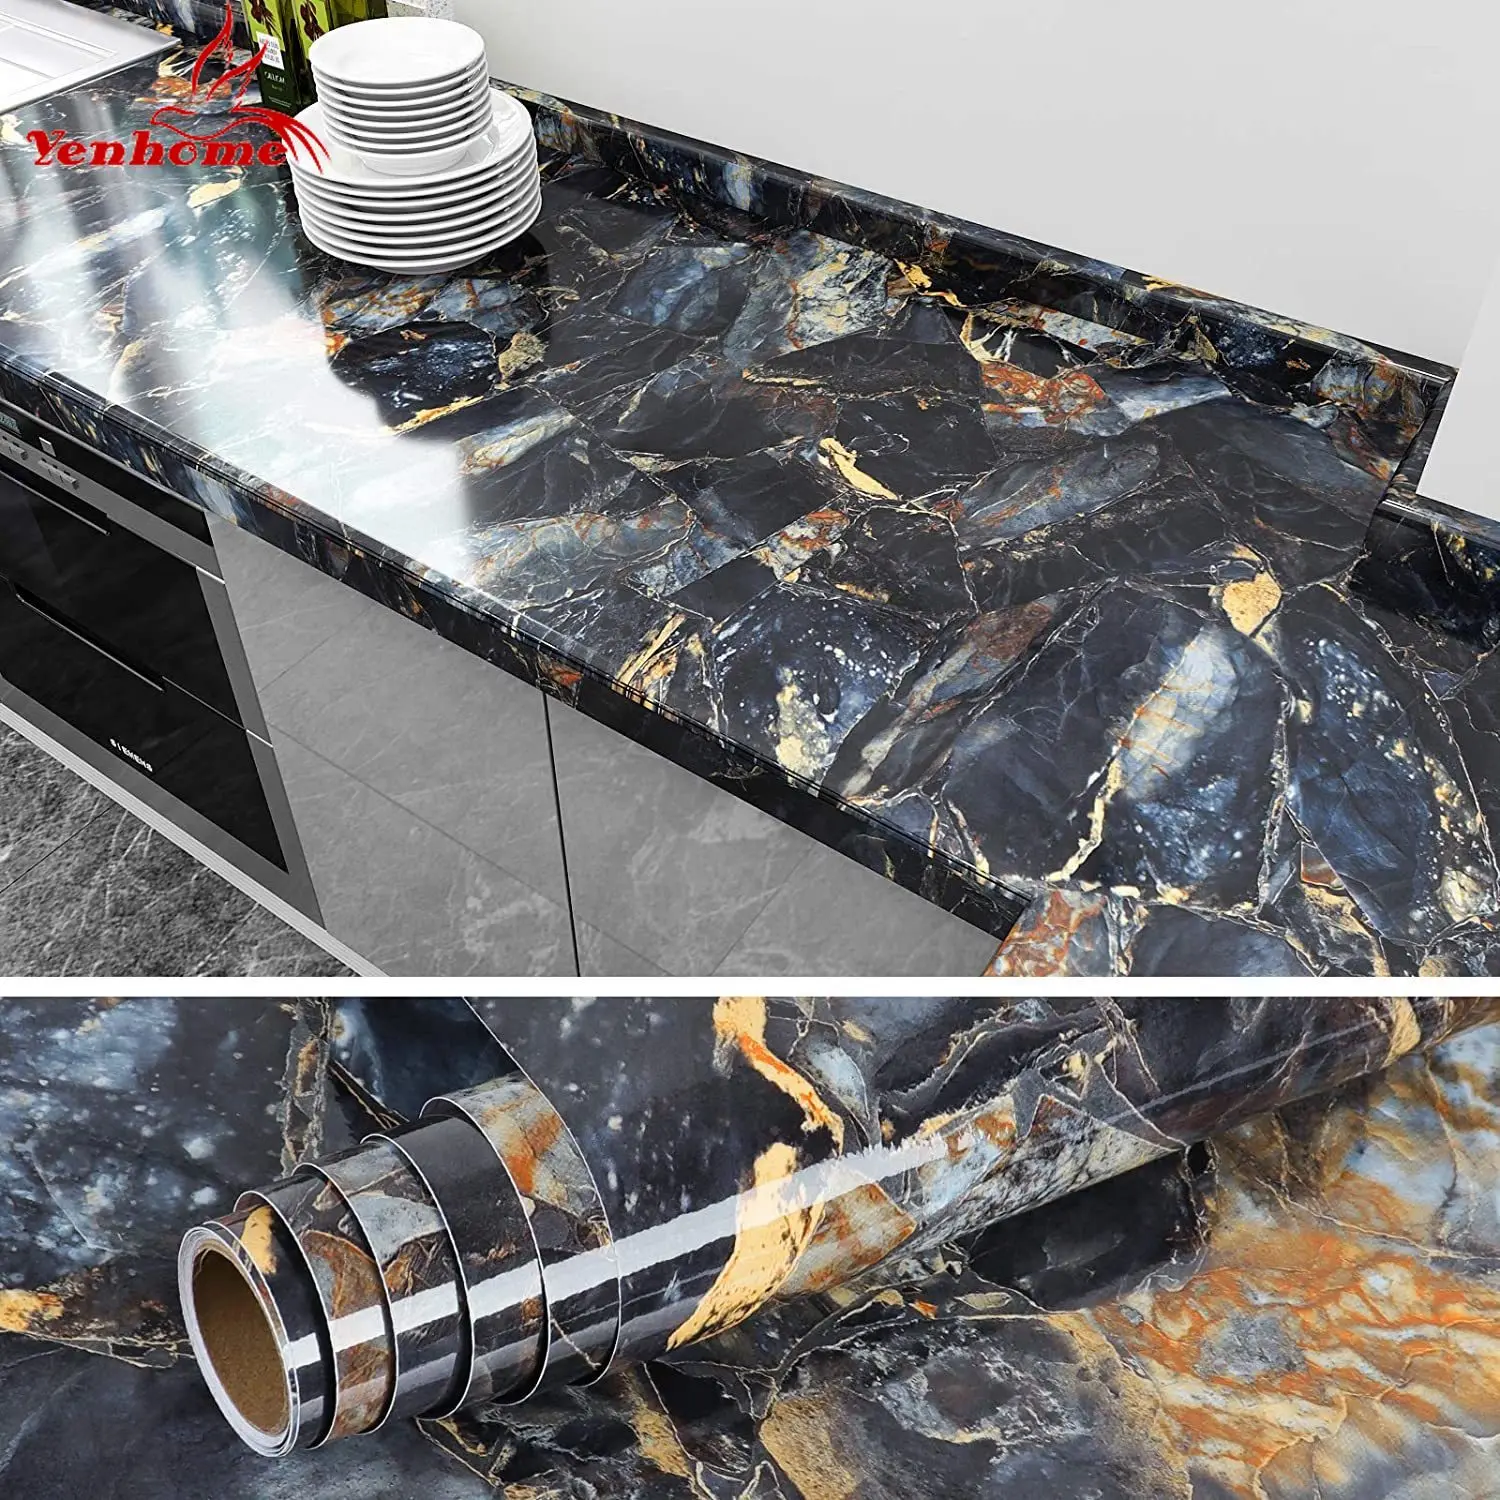 PVC Waterproof Wall Stickers Marble Vinyl Floor Decorative Film Self Adhesive Contact Paper for Bathroom Kitchen Cupboard Decor